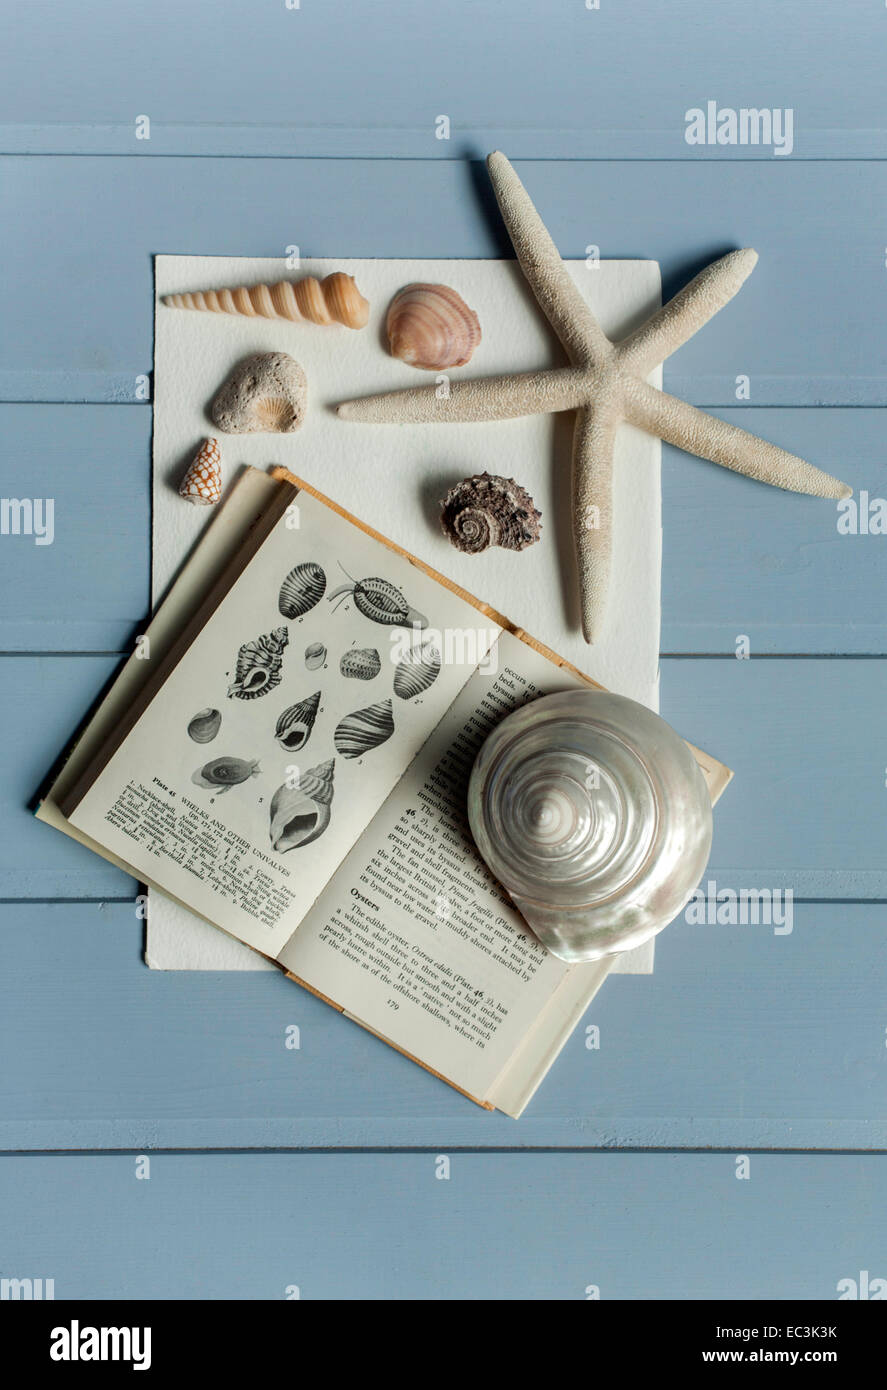 collection of seashells on Observer reference book Stock Photo